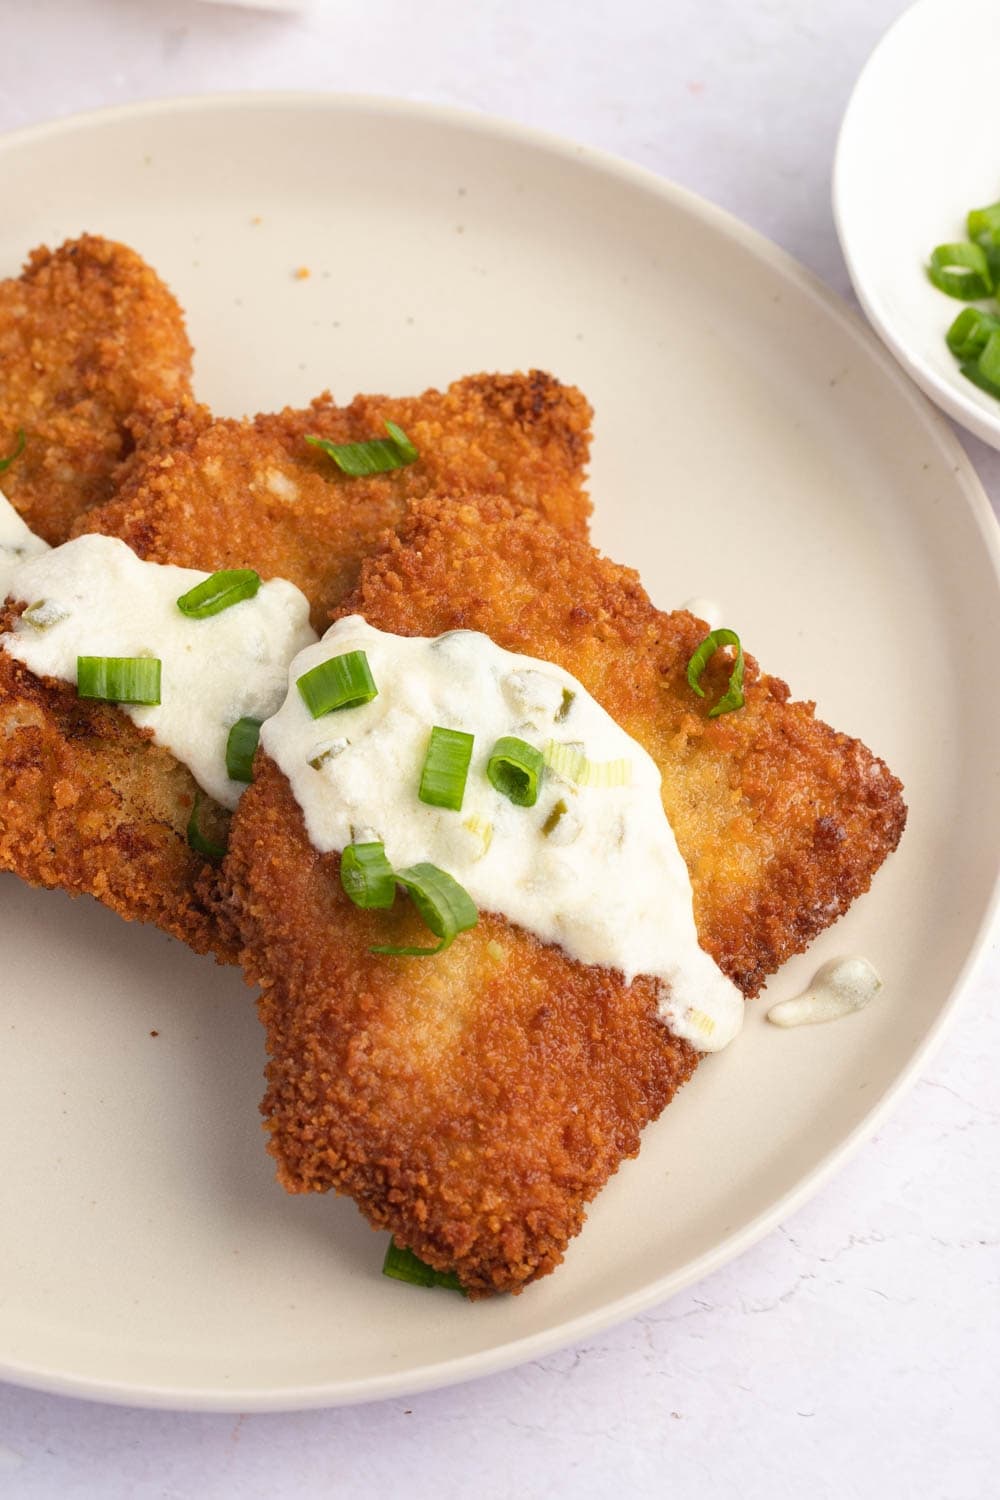 Homemade Crispy Pork Cutlet with Sour Cream and Green Onions